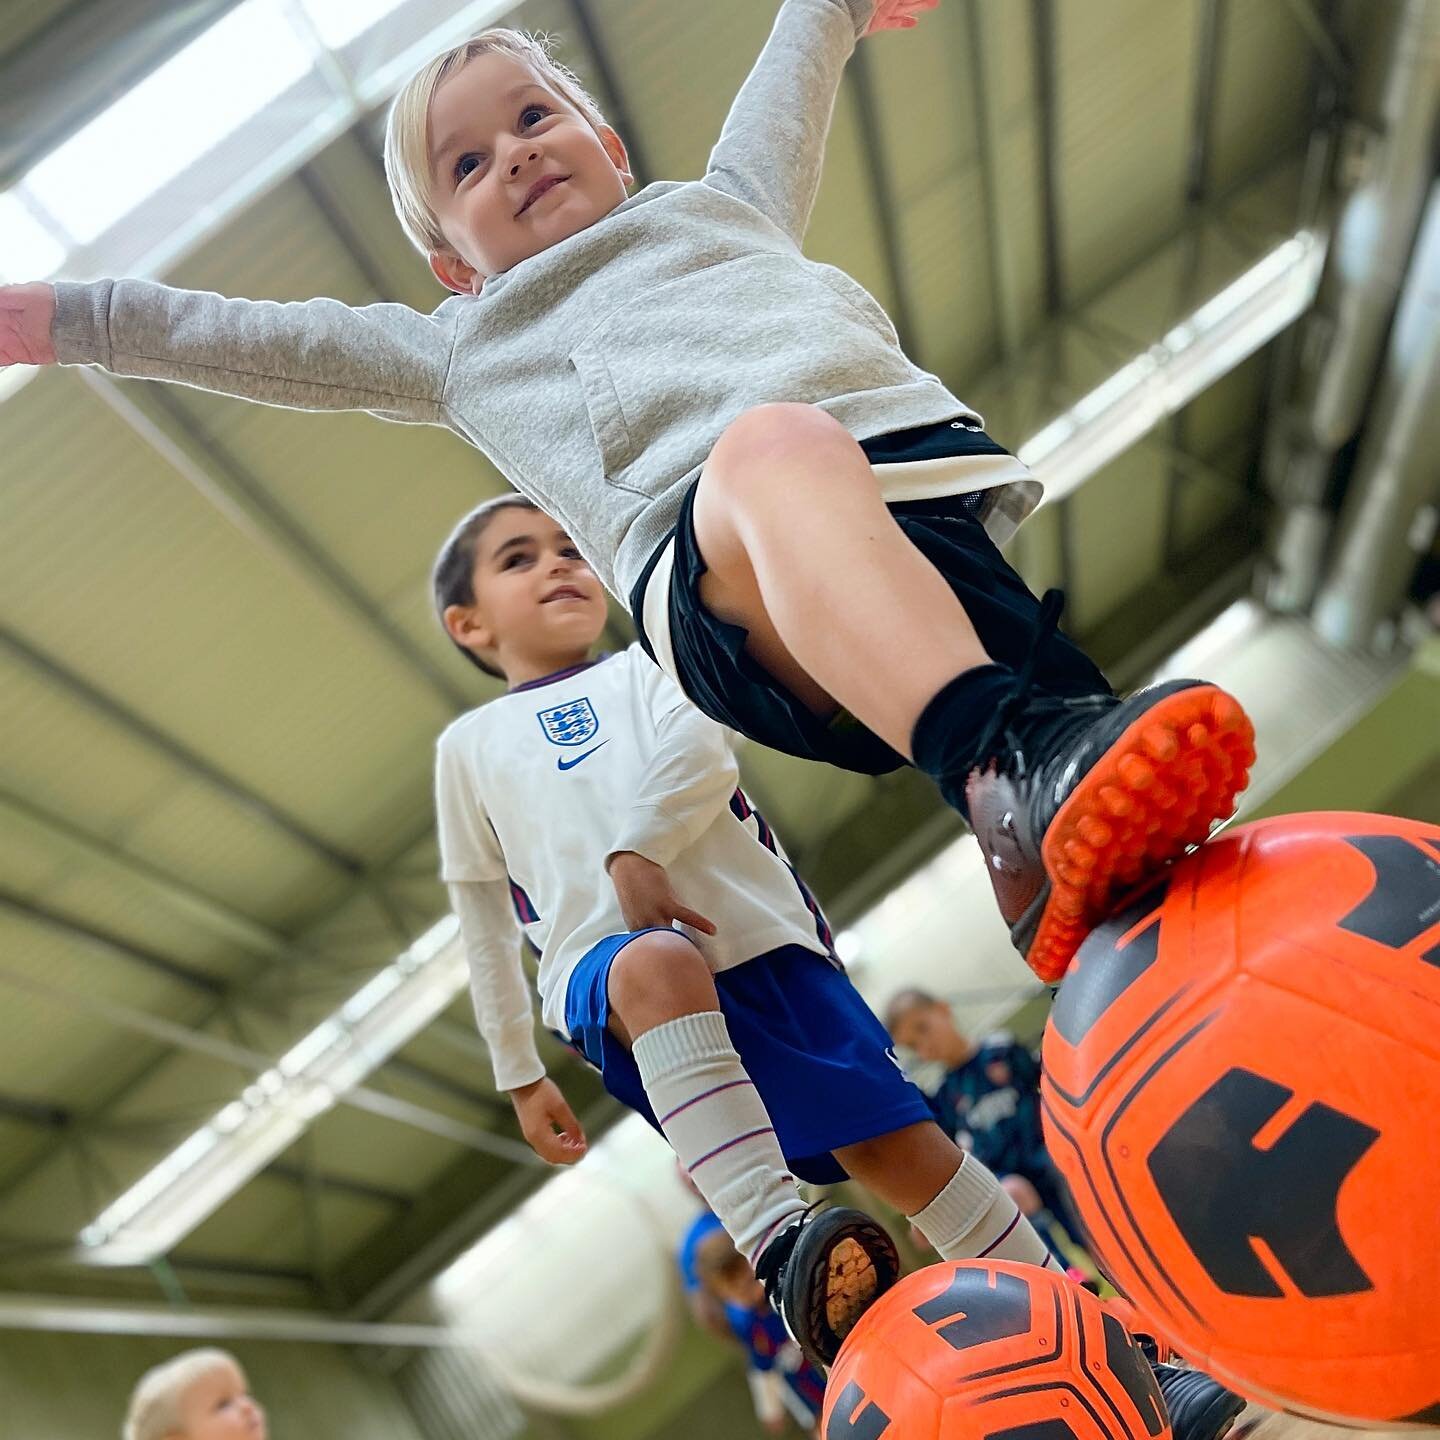 It&rsquo;s all smiles when you enjoy your football! 

Football Coaching for 2-6 years.

If your little ones have energy to burn and would love the opportunity to run around, in a safe, play-oriented setting, that will introduce them to the basics of 